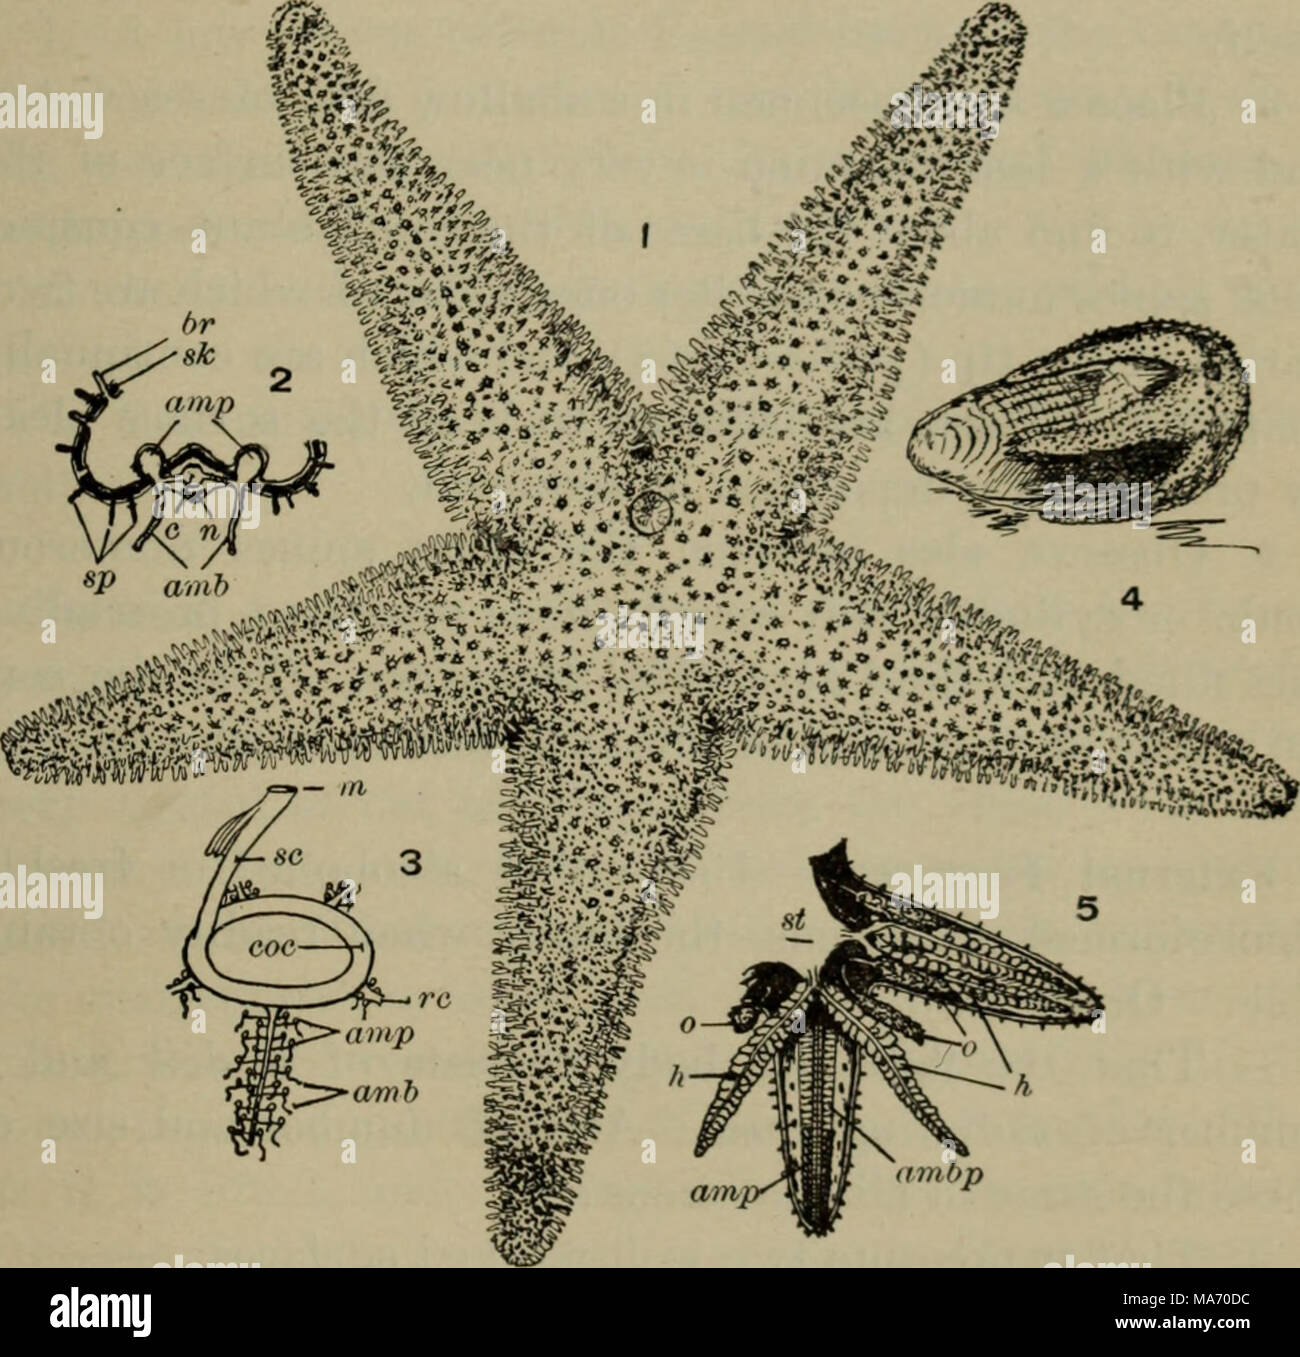 . Elementary lessons in zoölogy : a guide in studying animal life and structure in field and laboratory . Starfish.—1. Starfish (Asterias rmlgaris), a. iirge dried specimen one half natural size. 2. Diagram of cross section of oral part of an arm: br, branchial tentacle; sk, calcareous plate of skeleton (in heavy black) ; sp, spines (those designated are on an adambulacral plate); amp, ampullje; c, radial canal; 7i, radial nerve; amh, ambulacra, or tube feet. 3. Dia- gram of water-vascular system: m, madreporite; sc, stone canal; coc, cir- cumoral canal; re, radial canal; amp, ampulla^; amb,  Stock Photo